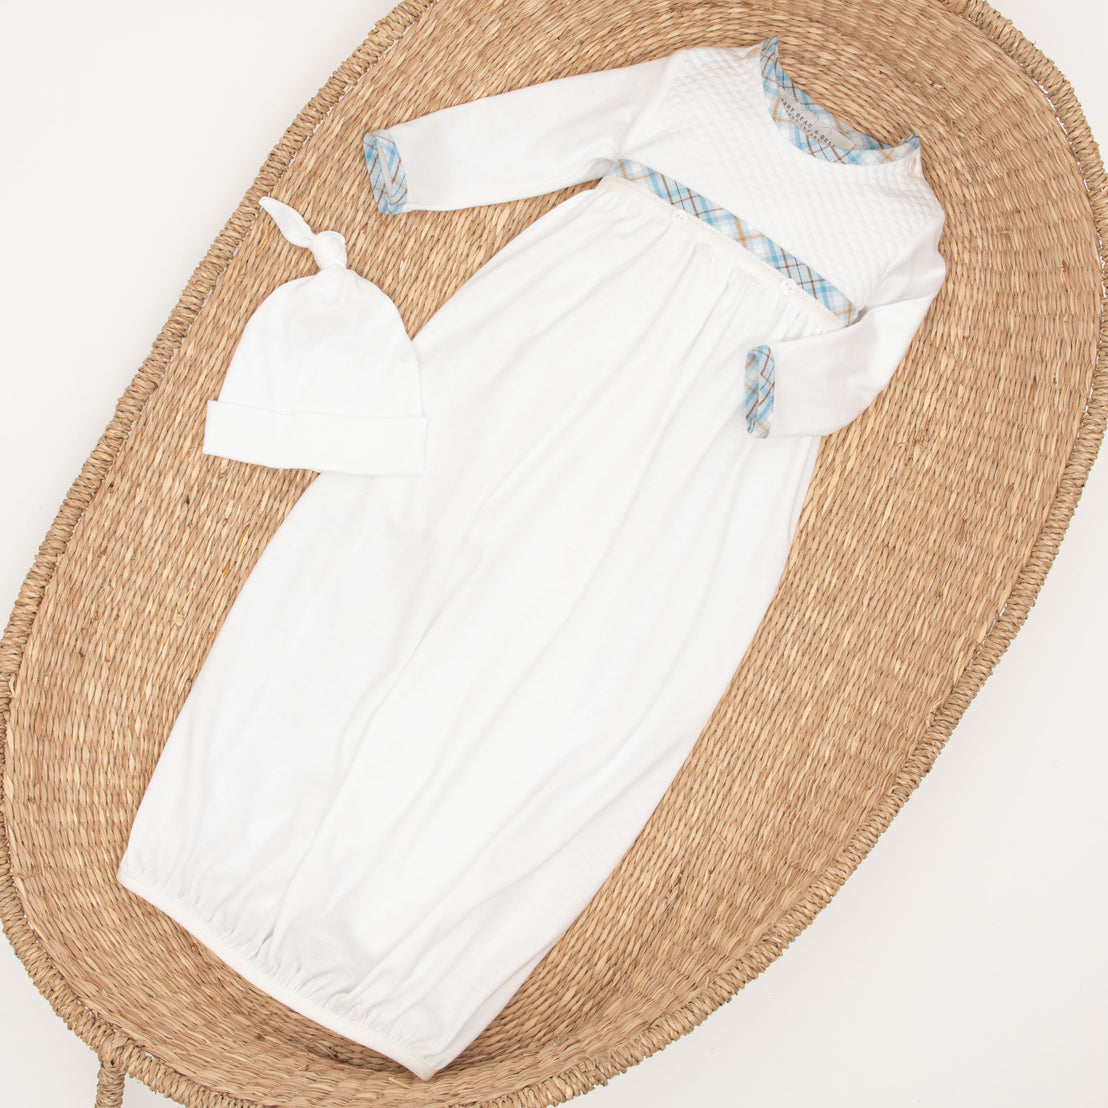 An upscale Mason Newborn Gift Set, consisting of a vintage white baby gown and matching hat with blue detailing, displayed on a round woven mat against a light background.